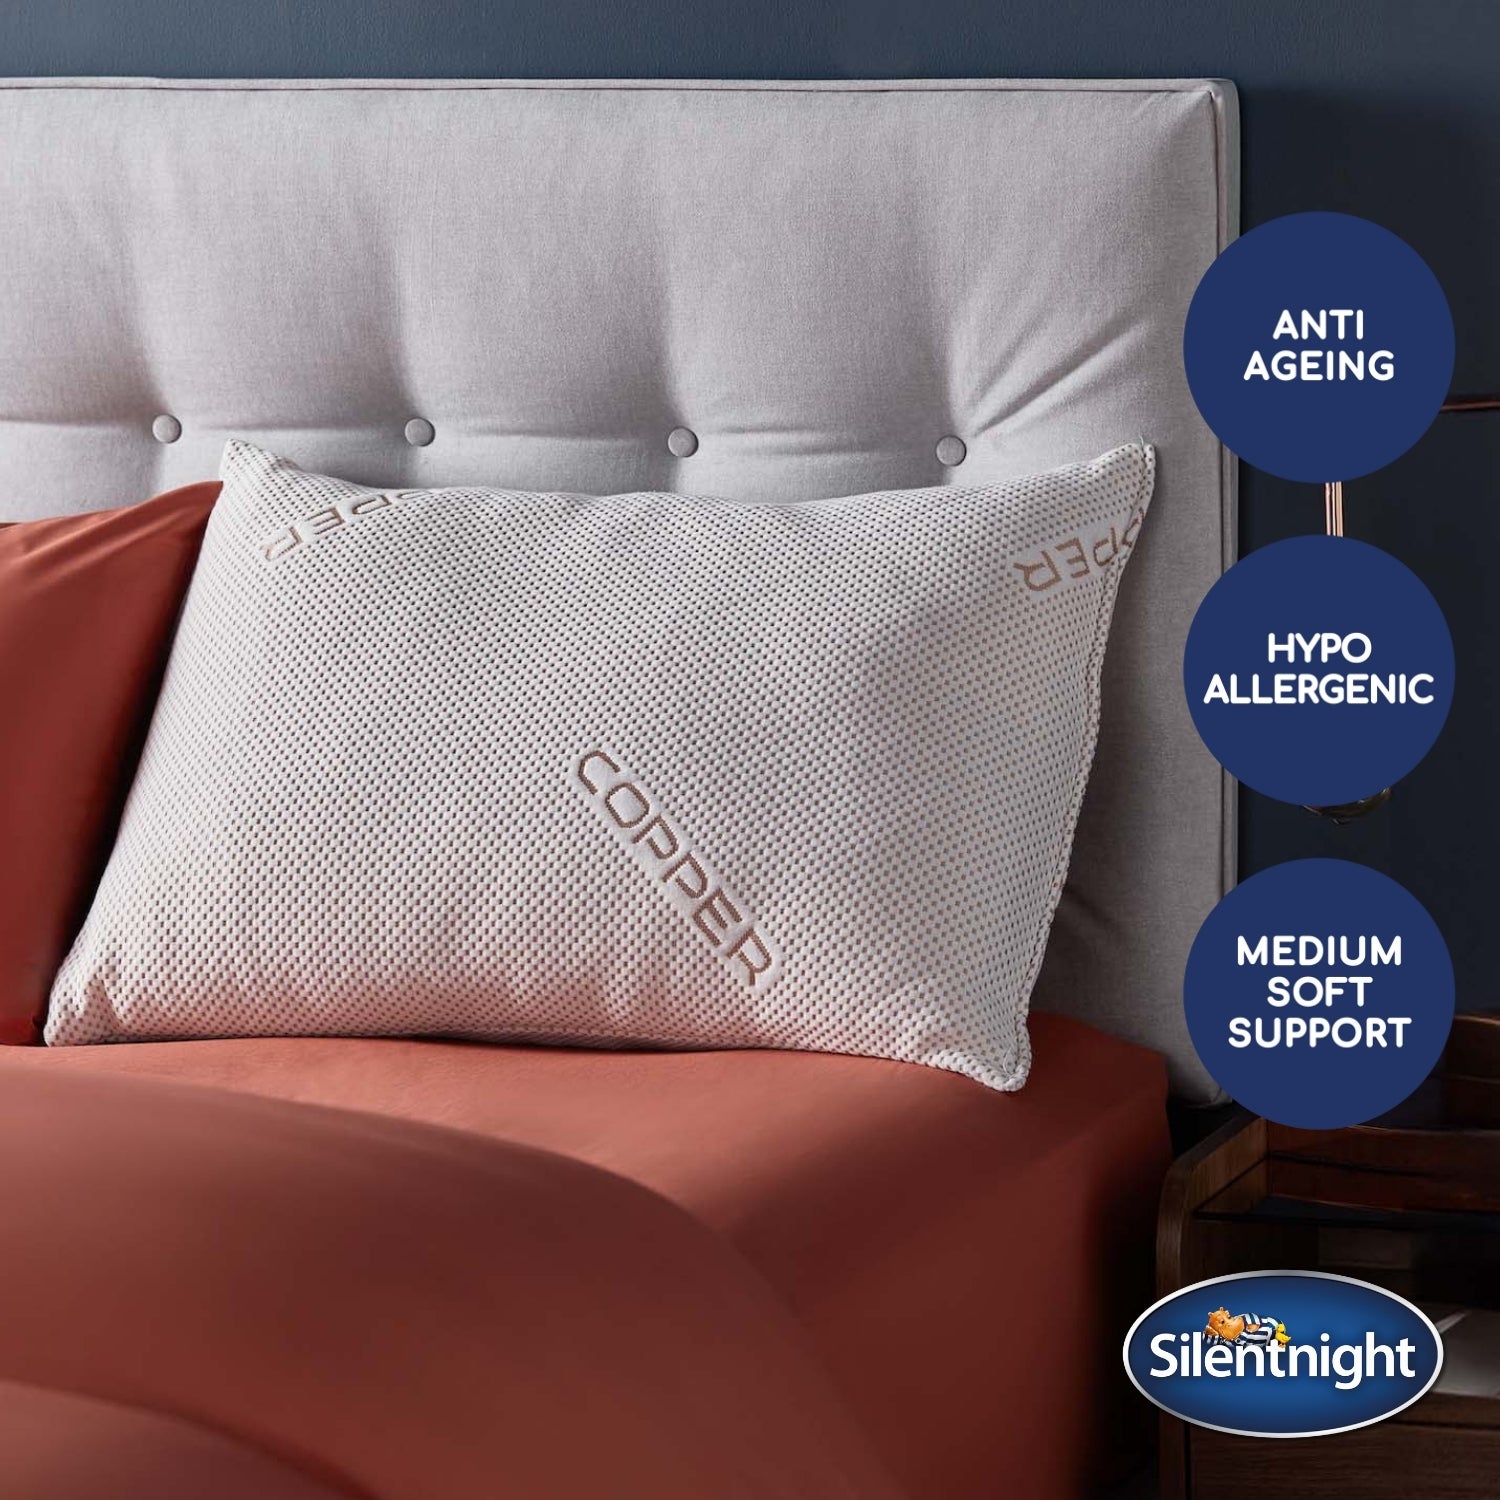 Silentnight Wellbeing Copper Infused Pillow - Medium Support